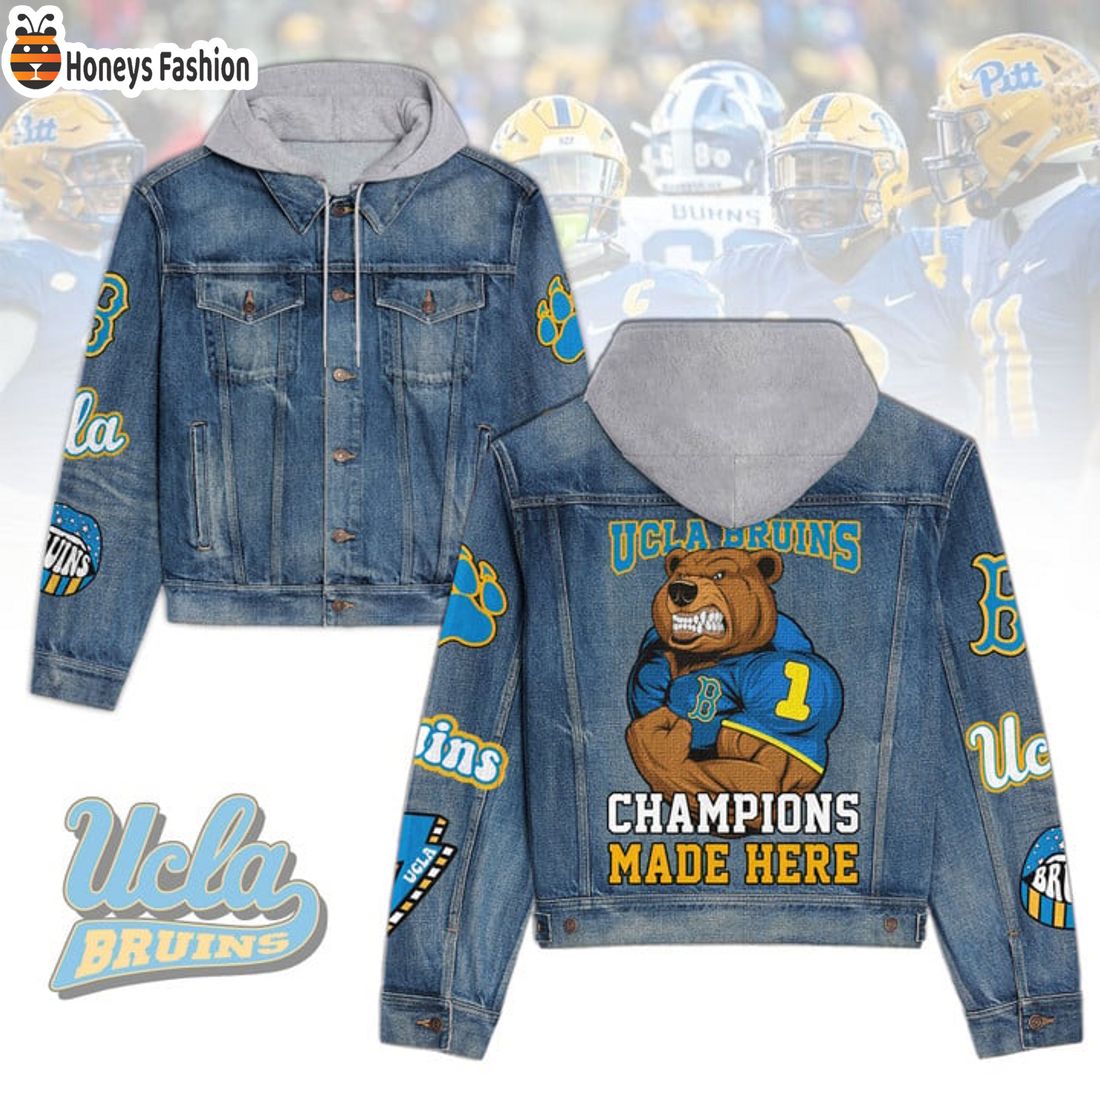 NEW Ucla Bruins Champions Made Here Hooded Denim Jacket